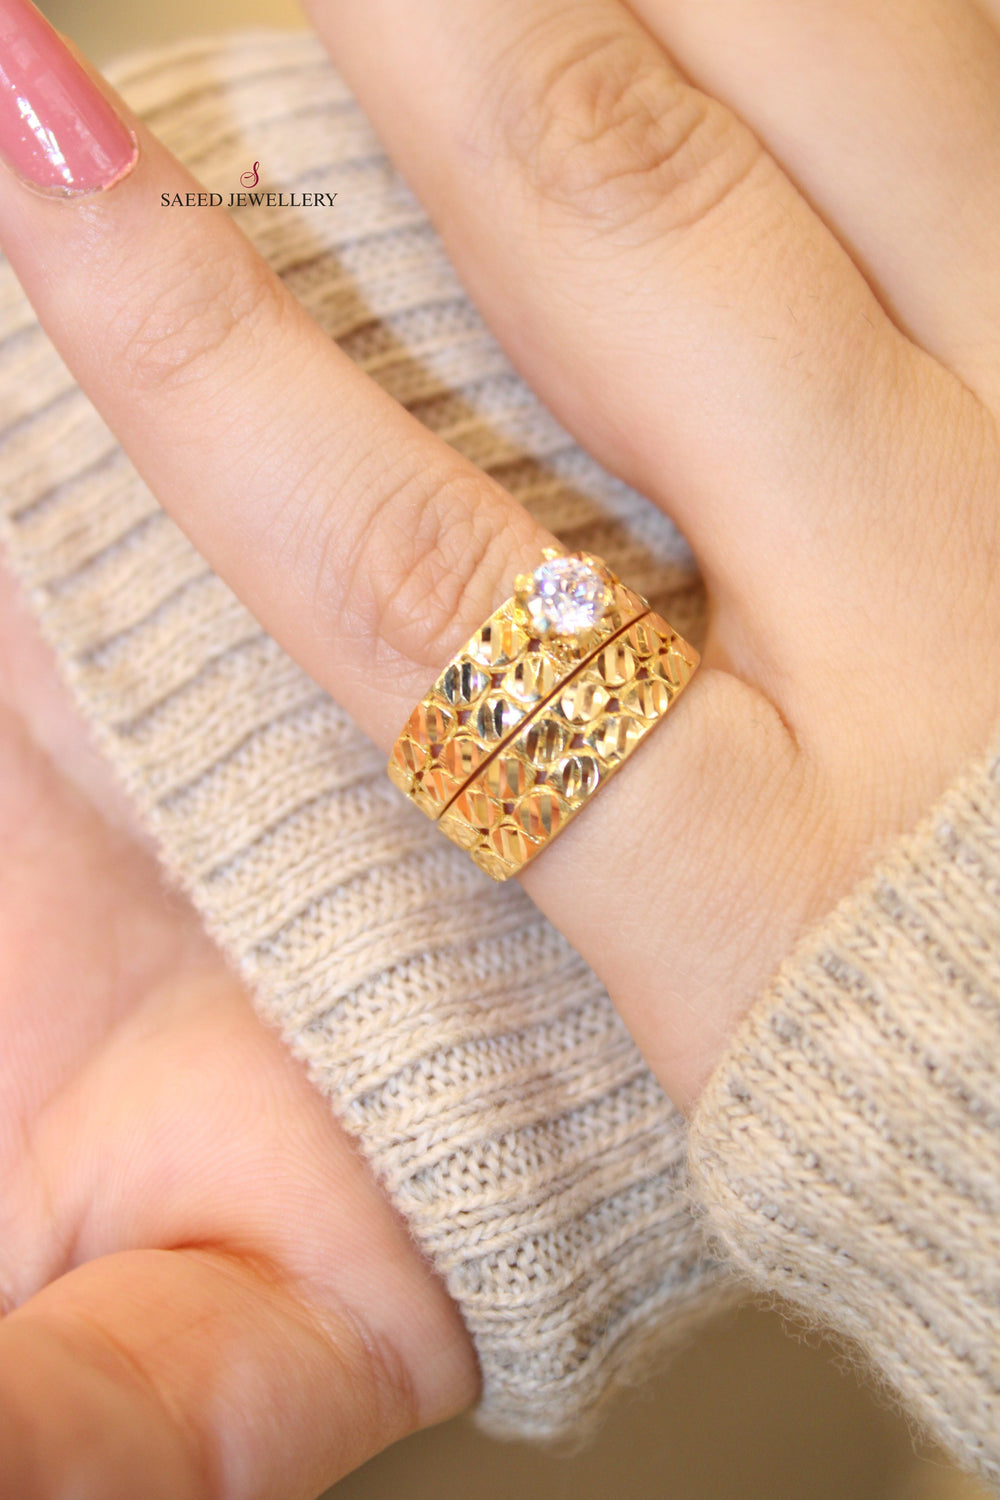 21K Twins Wedding Ring Made of 21K Yellow Gold by Saeed Jewelry-ذبلة-تونز-3